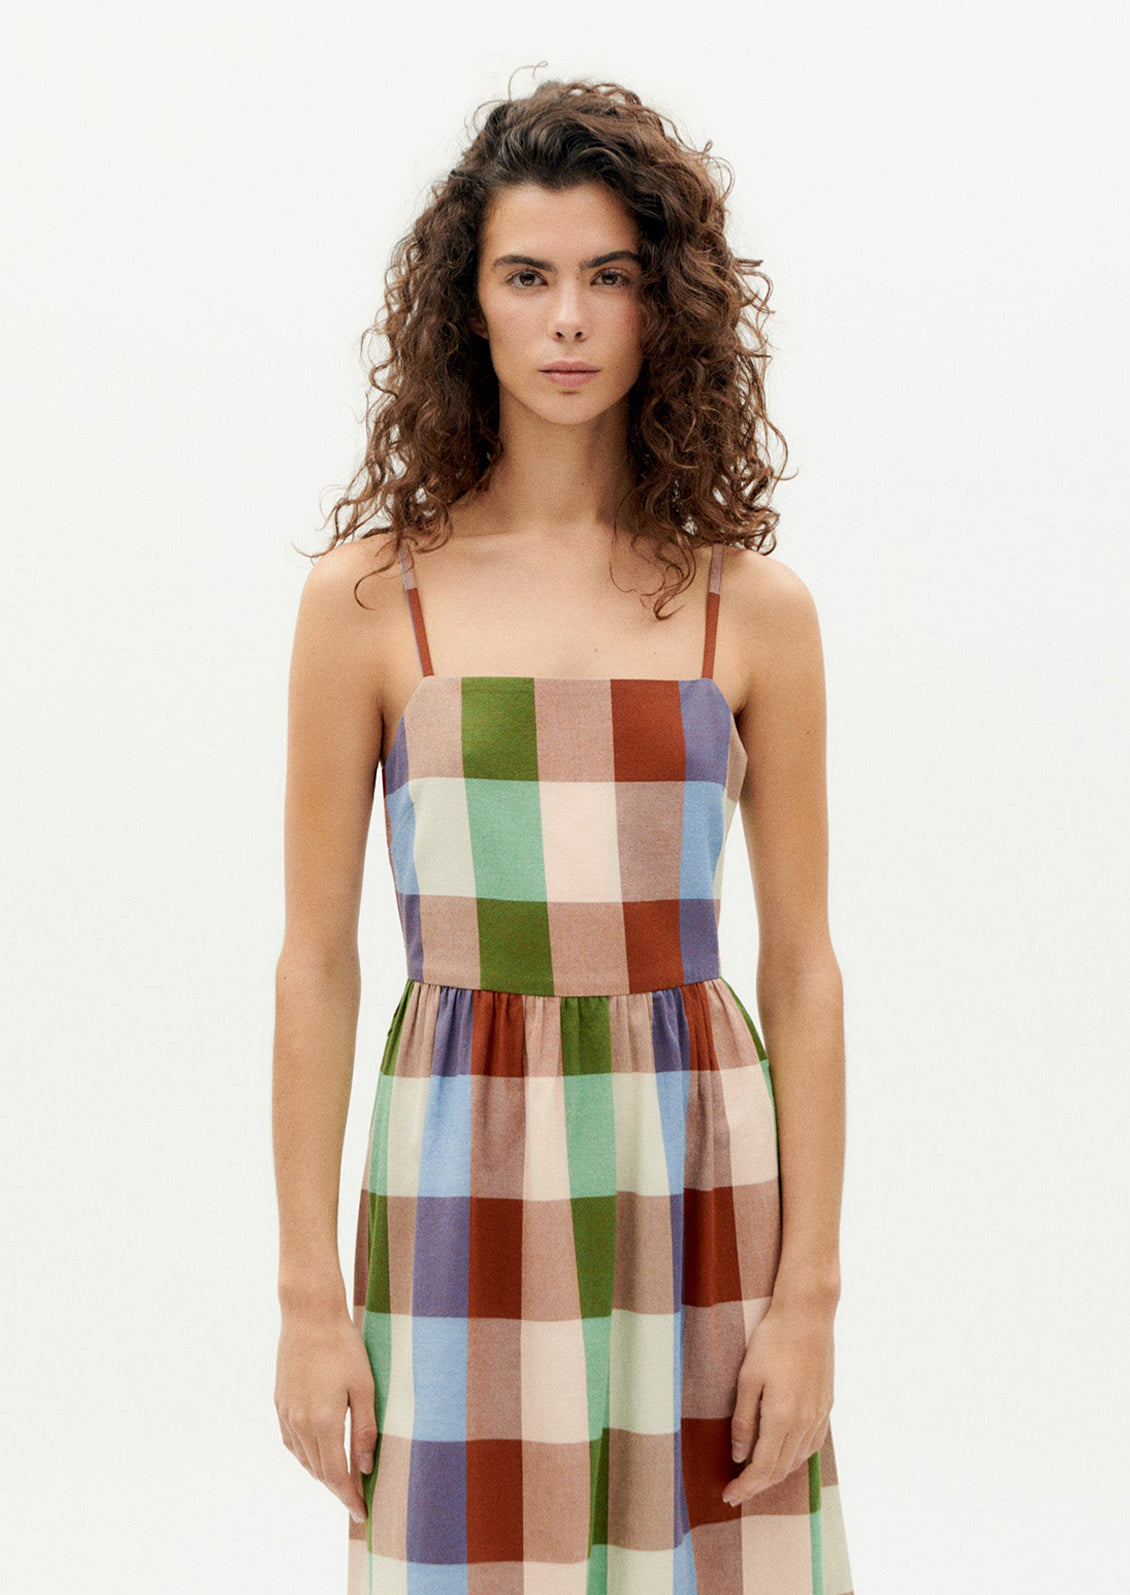 A woman wearing a thin strap dress with straight neckline, in colorful madras cotton.